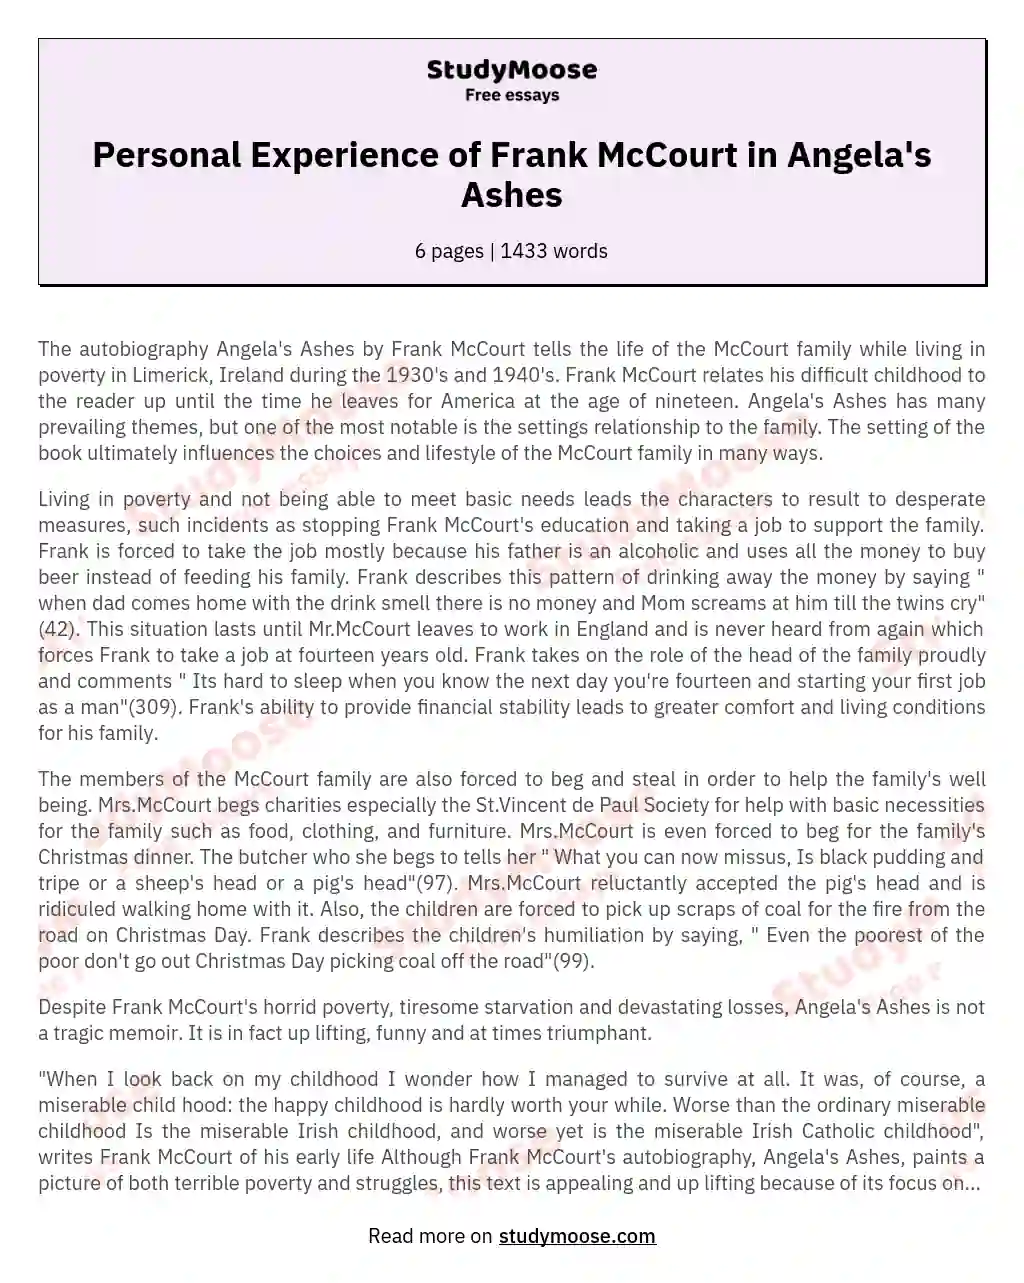 Personal Experience of Frank McCourt in Angela's Ashes